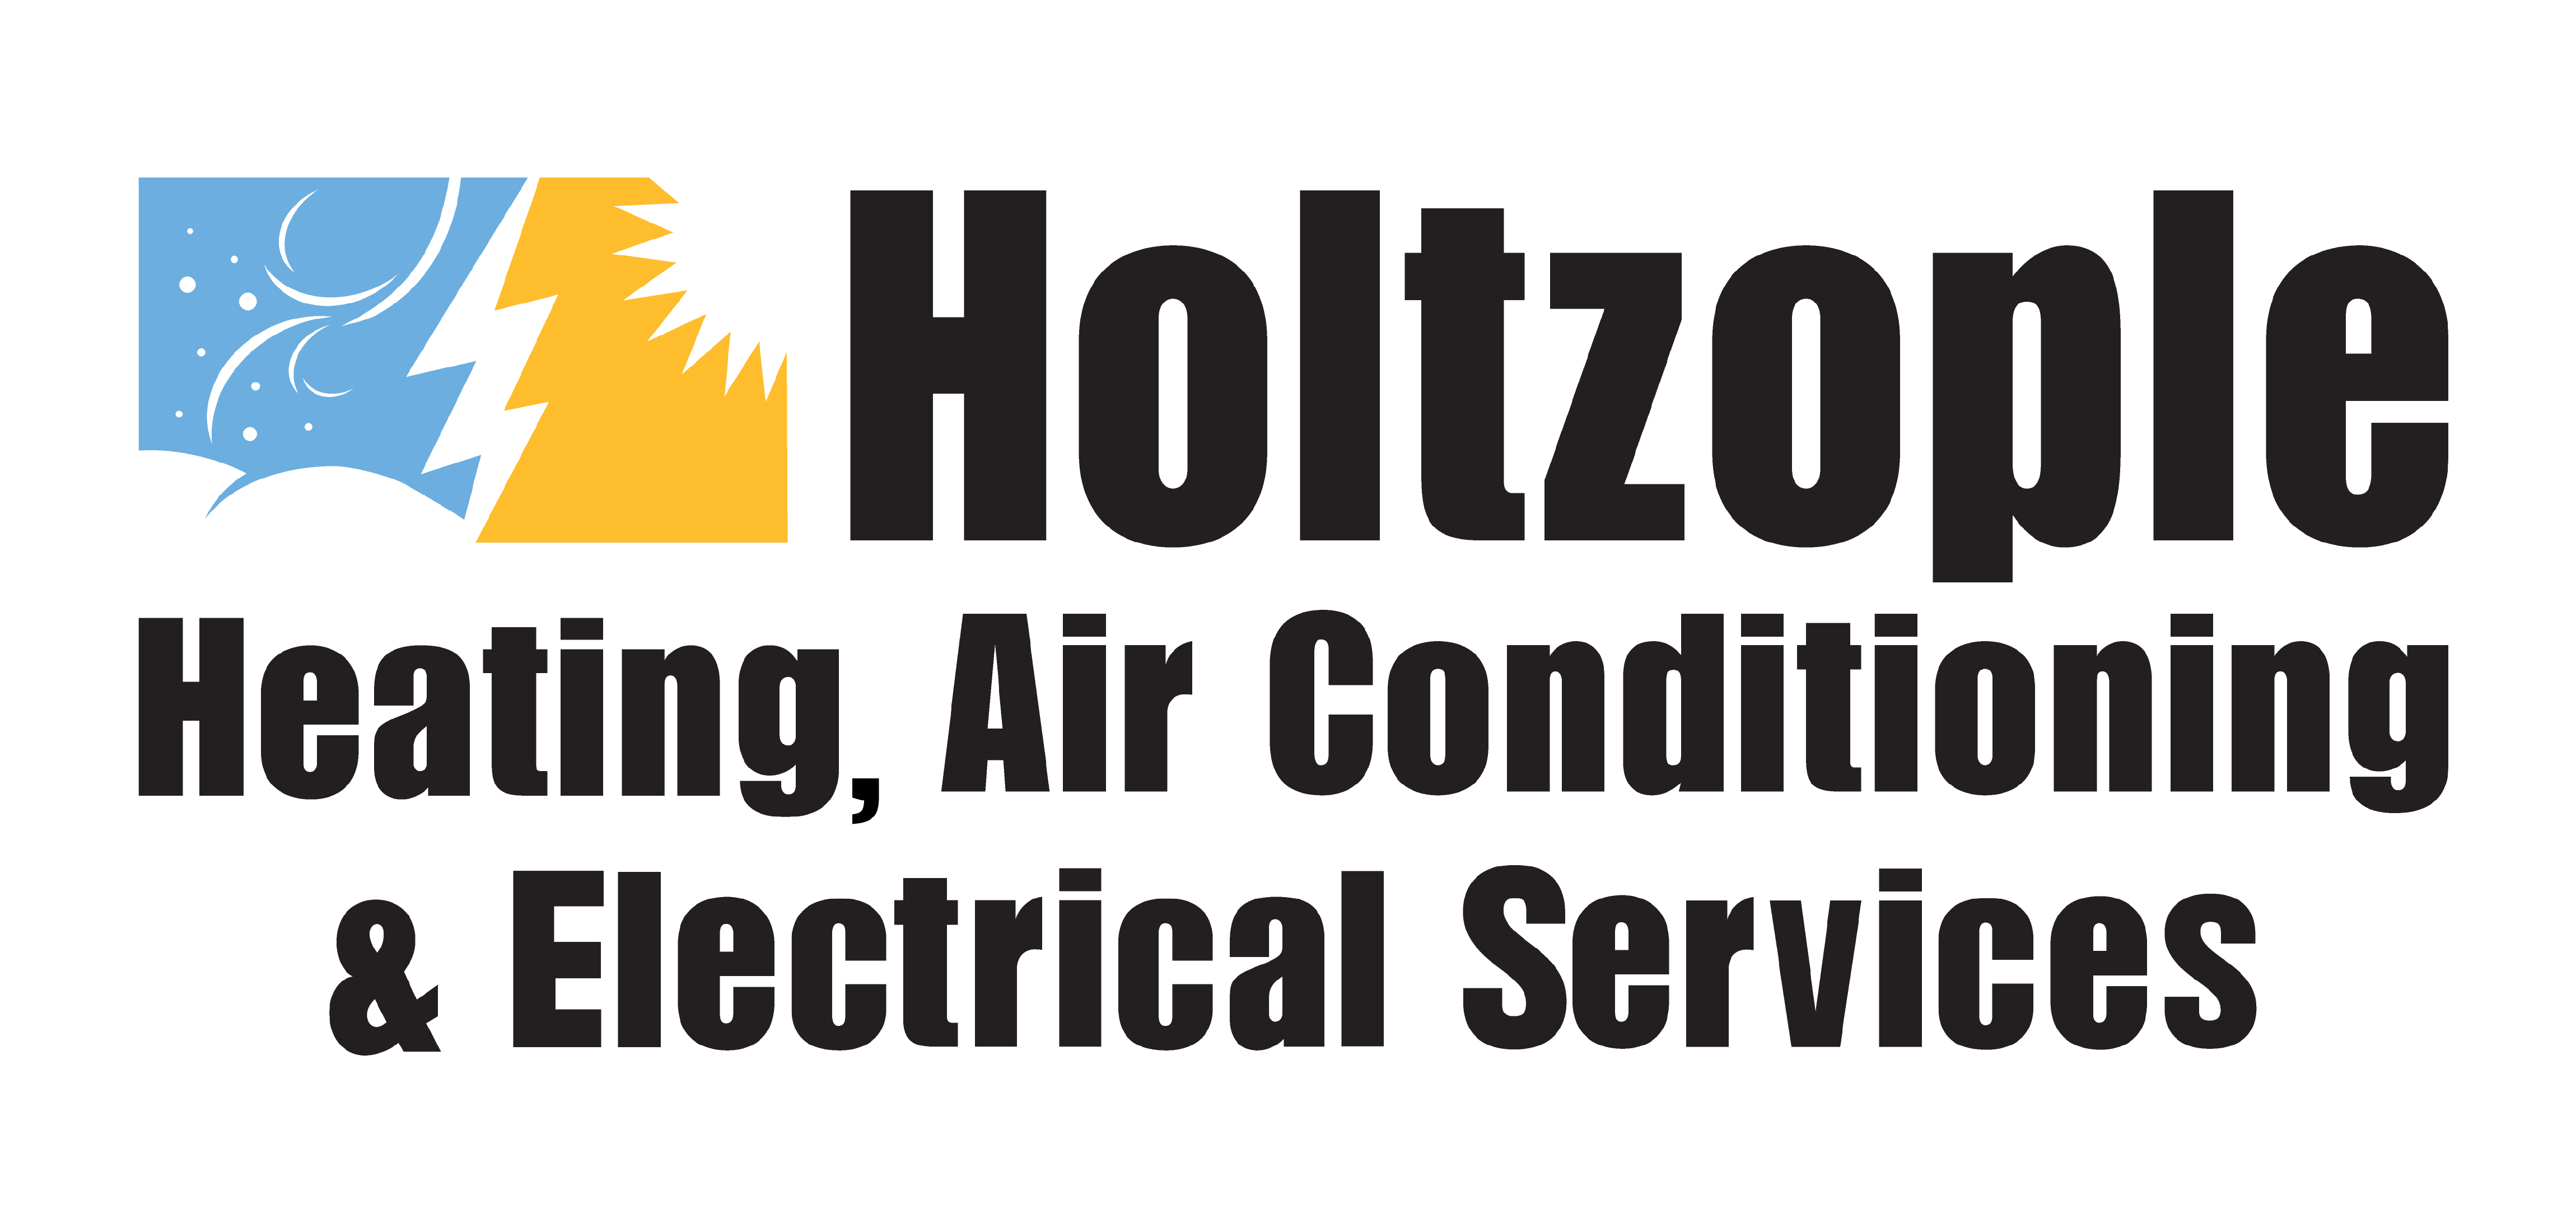 Holtzople Heating, Air Conditioning & Electrical Services logo